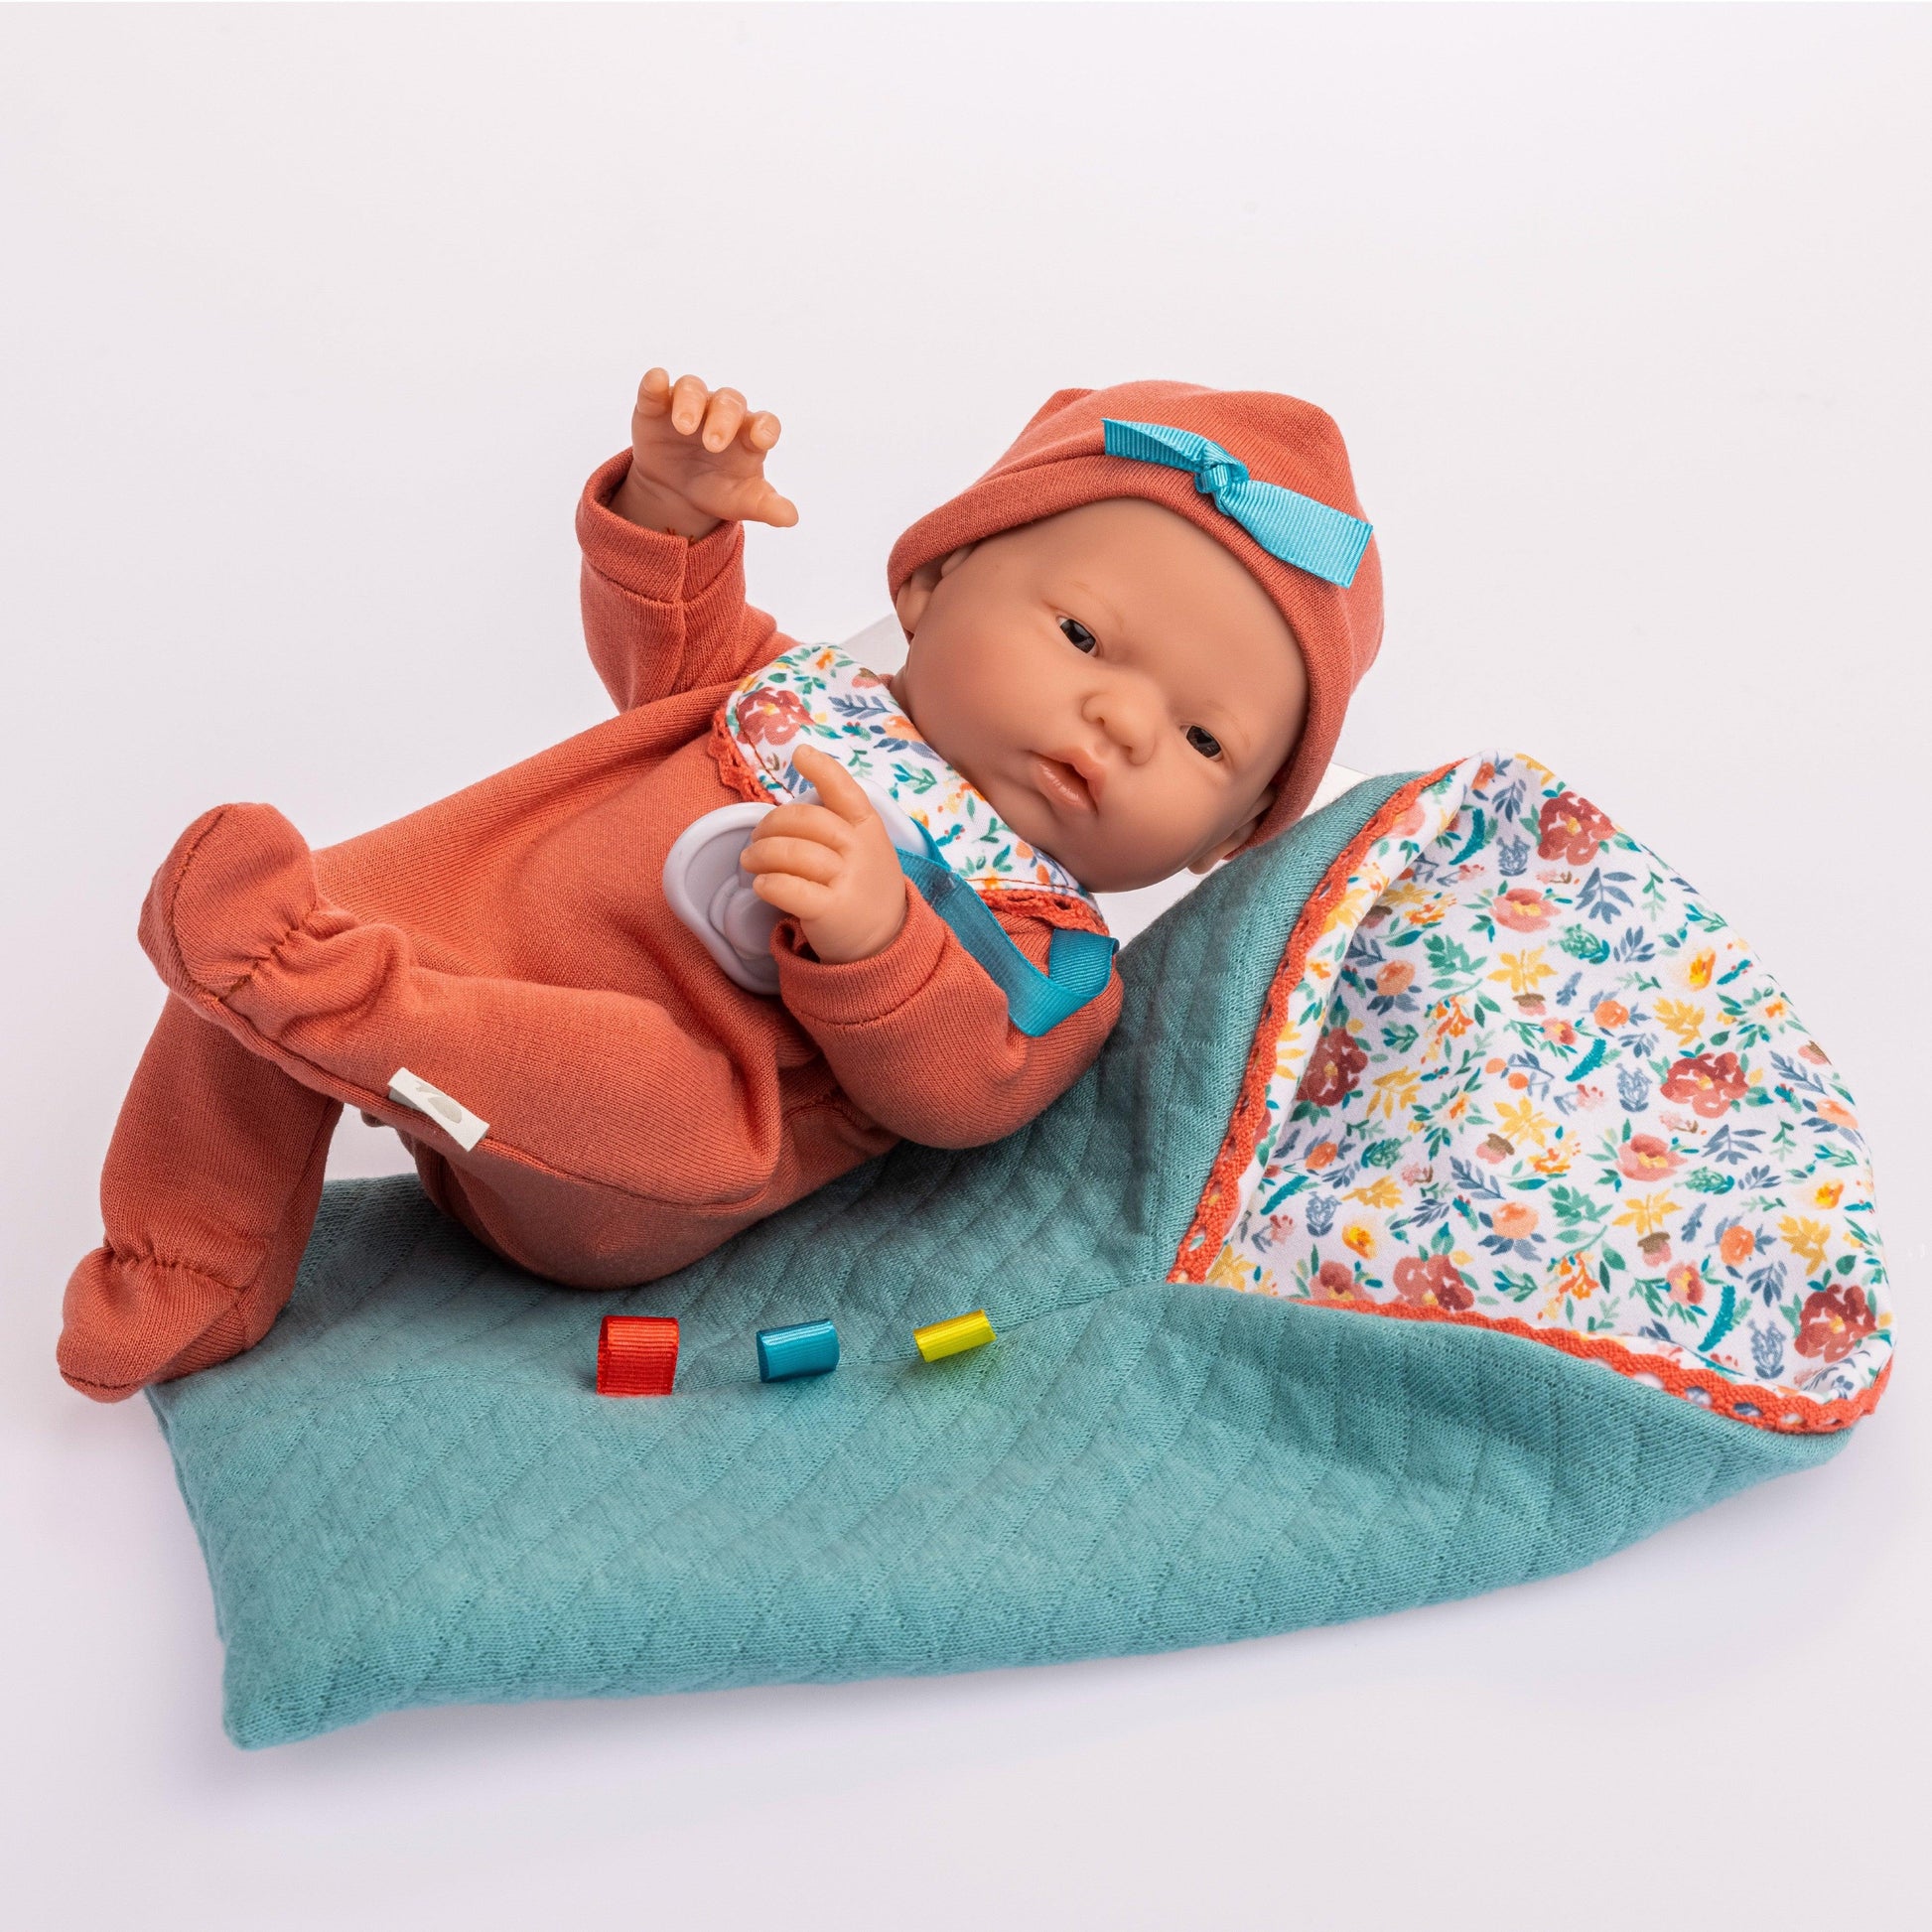 JC Toys La Mini Newborn 9.5in All Vinyl Anatomically Correct Real Girl Baby Doll NATURE Collection - JC Toys Group Inc.